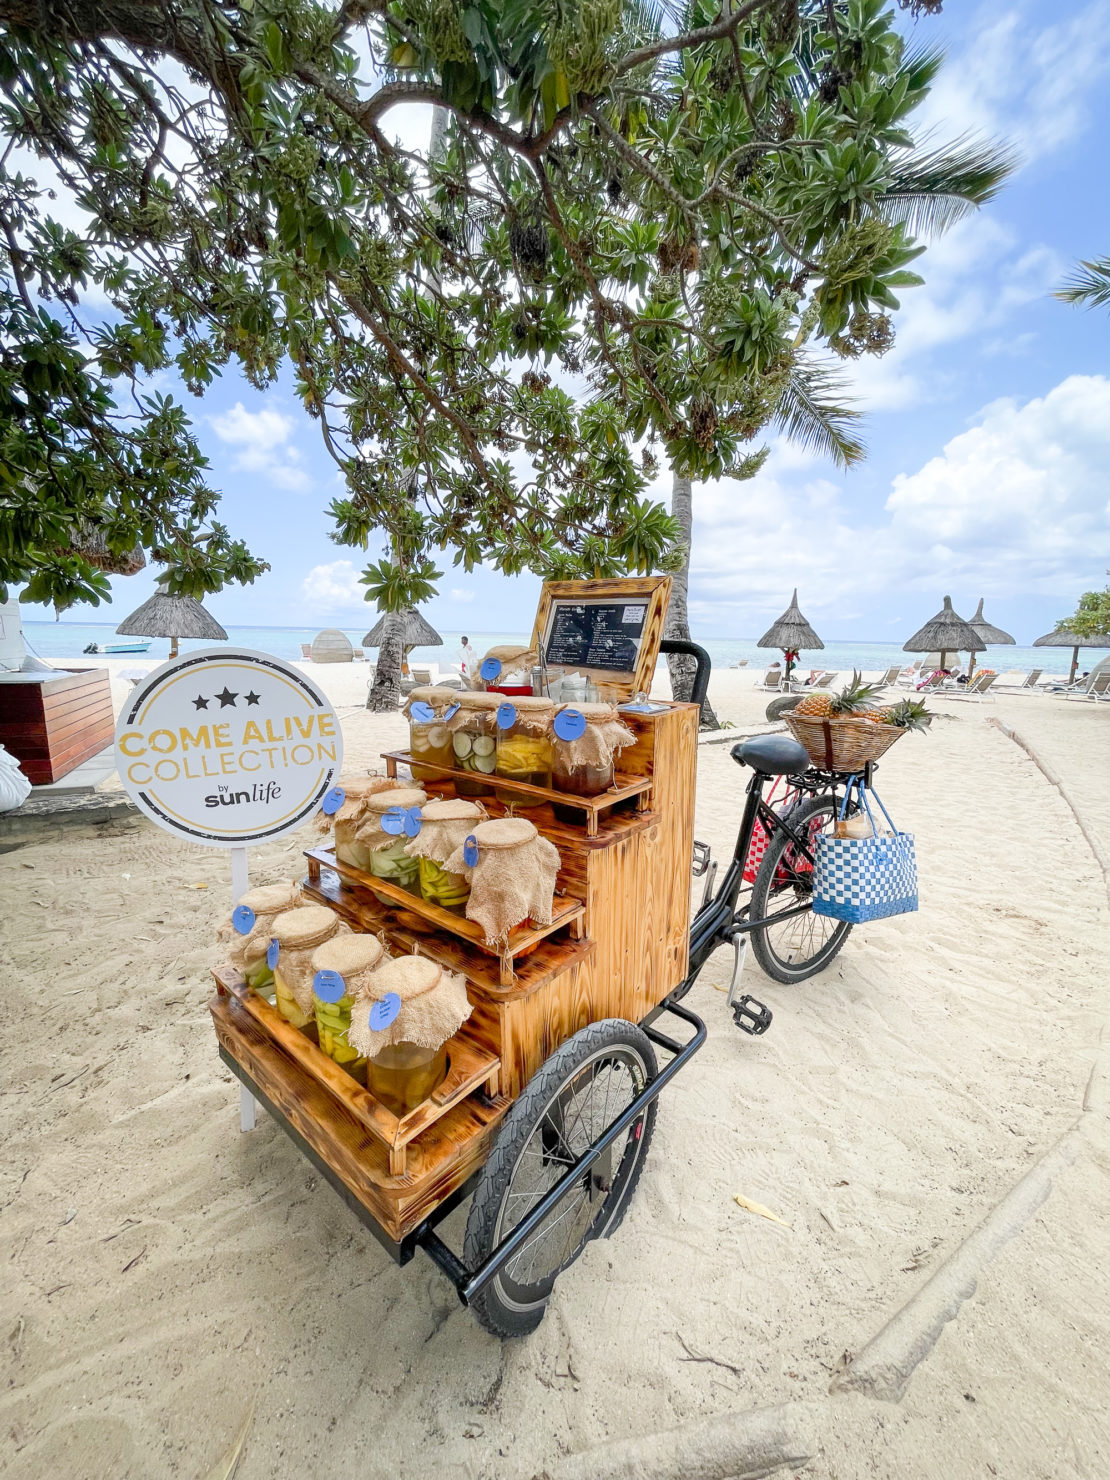 A cycling snack bar of traditional Mauritian snacks of pickled fruit and vegetables with chilli